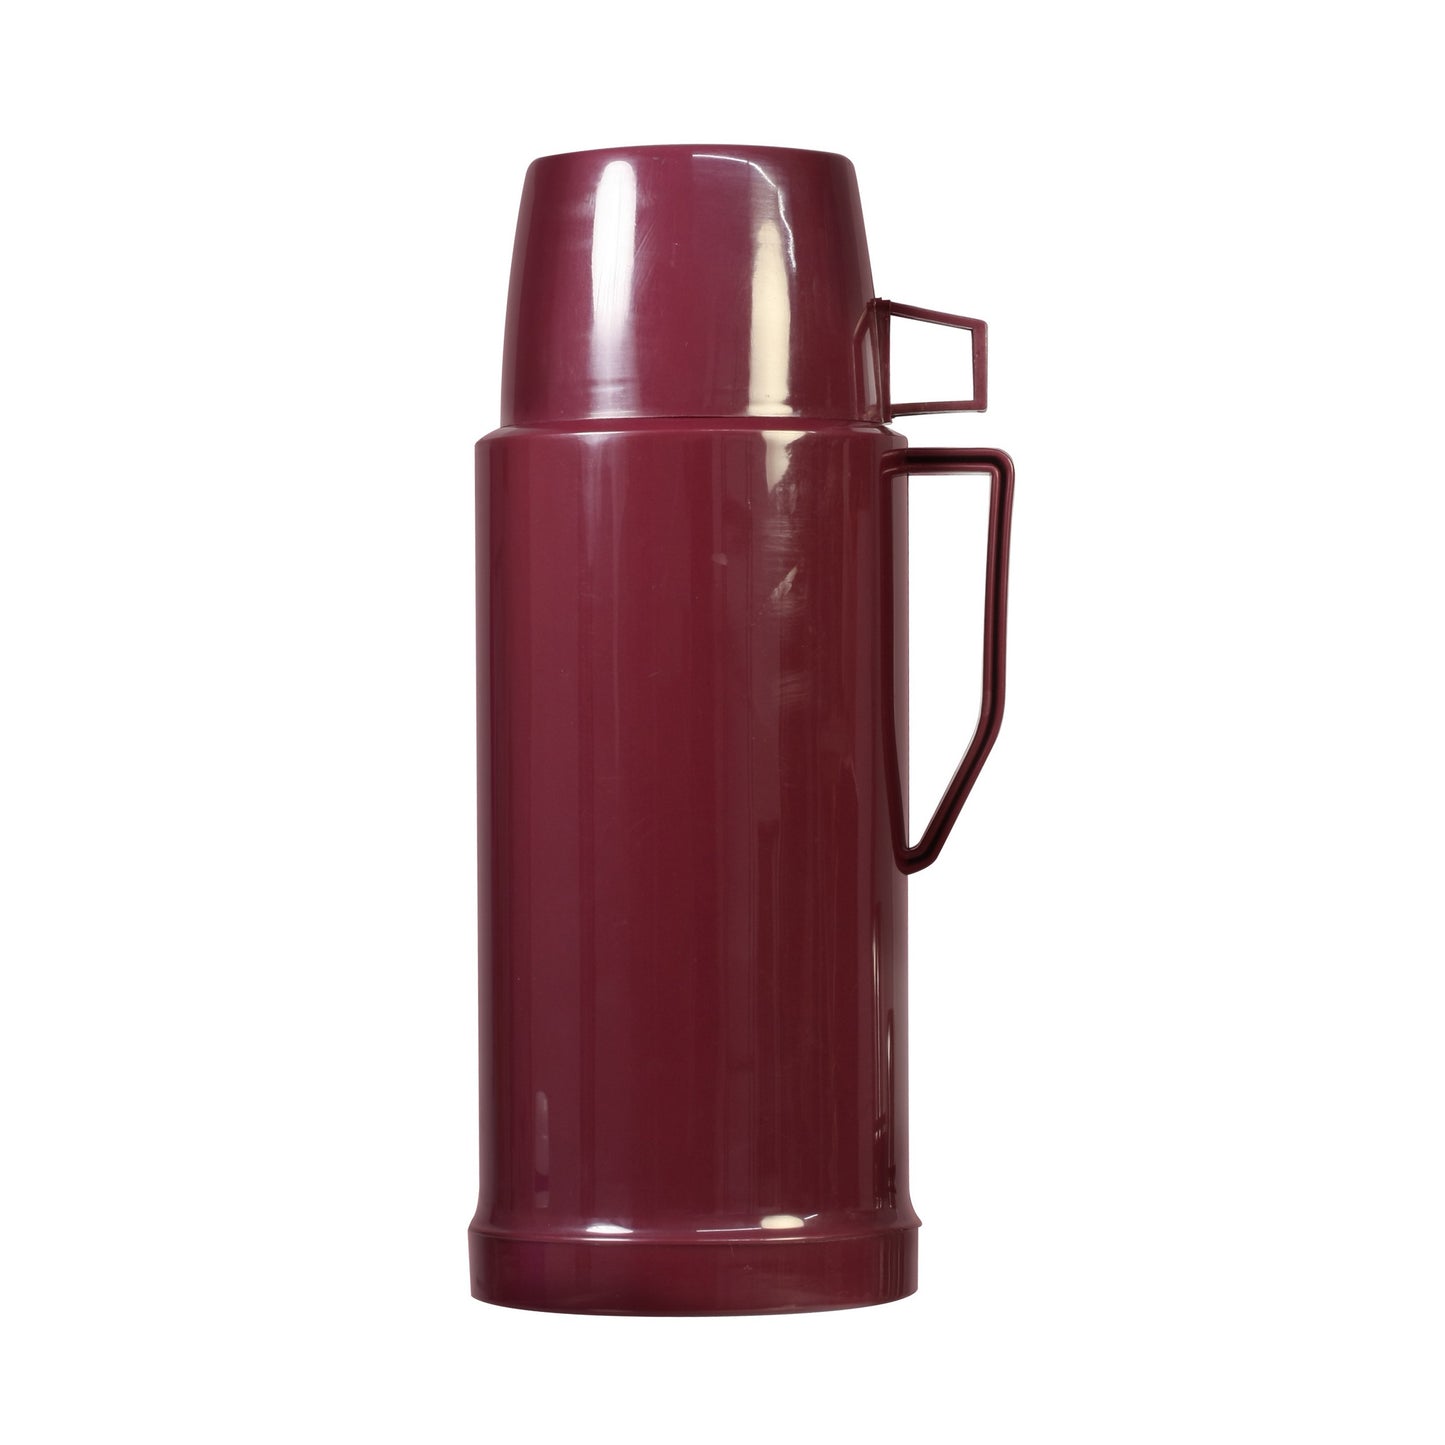 
                  
                    32oz Bene Casa Thermos with double wall vacuum insulation, 1-liter capacity thermos, blue red or green thermos keeps drinks hot or cold for hours
                  
                